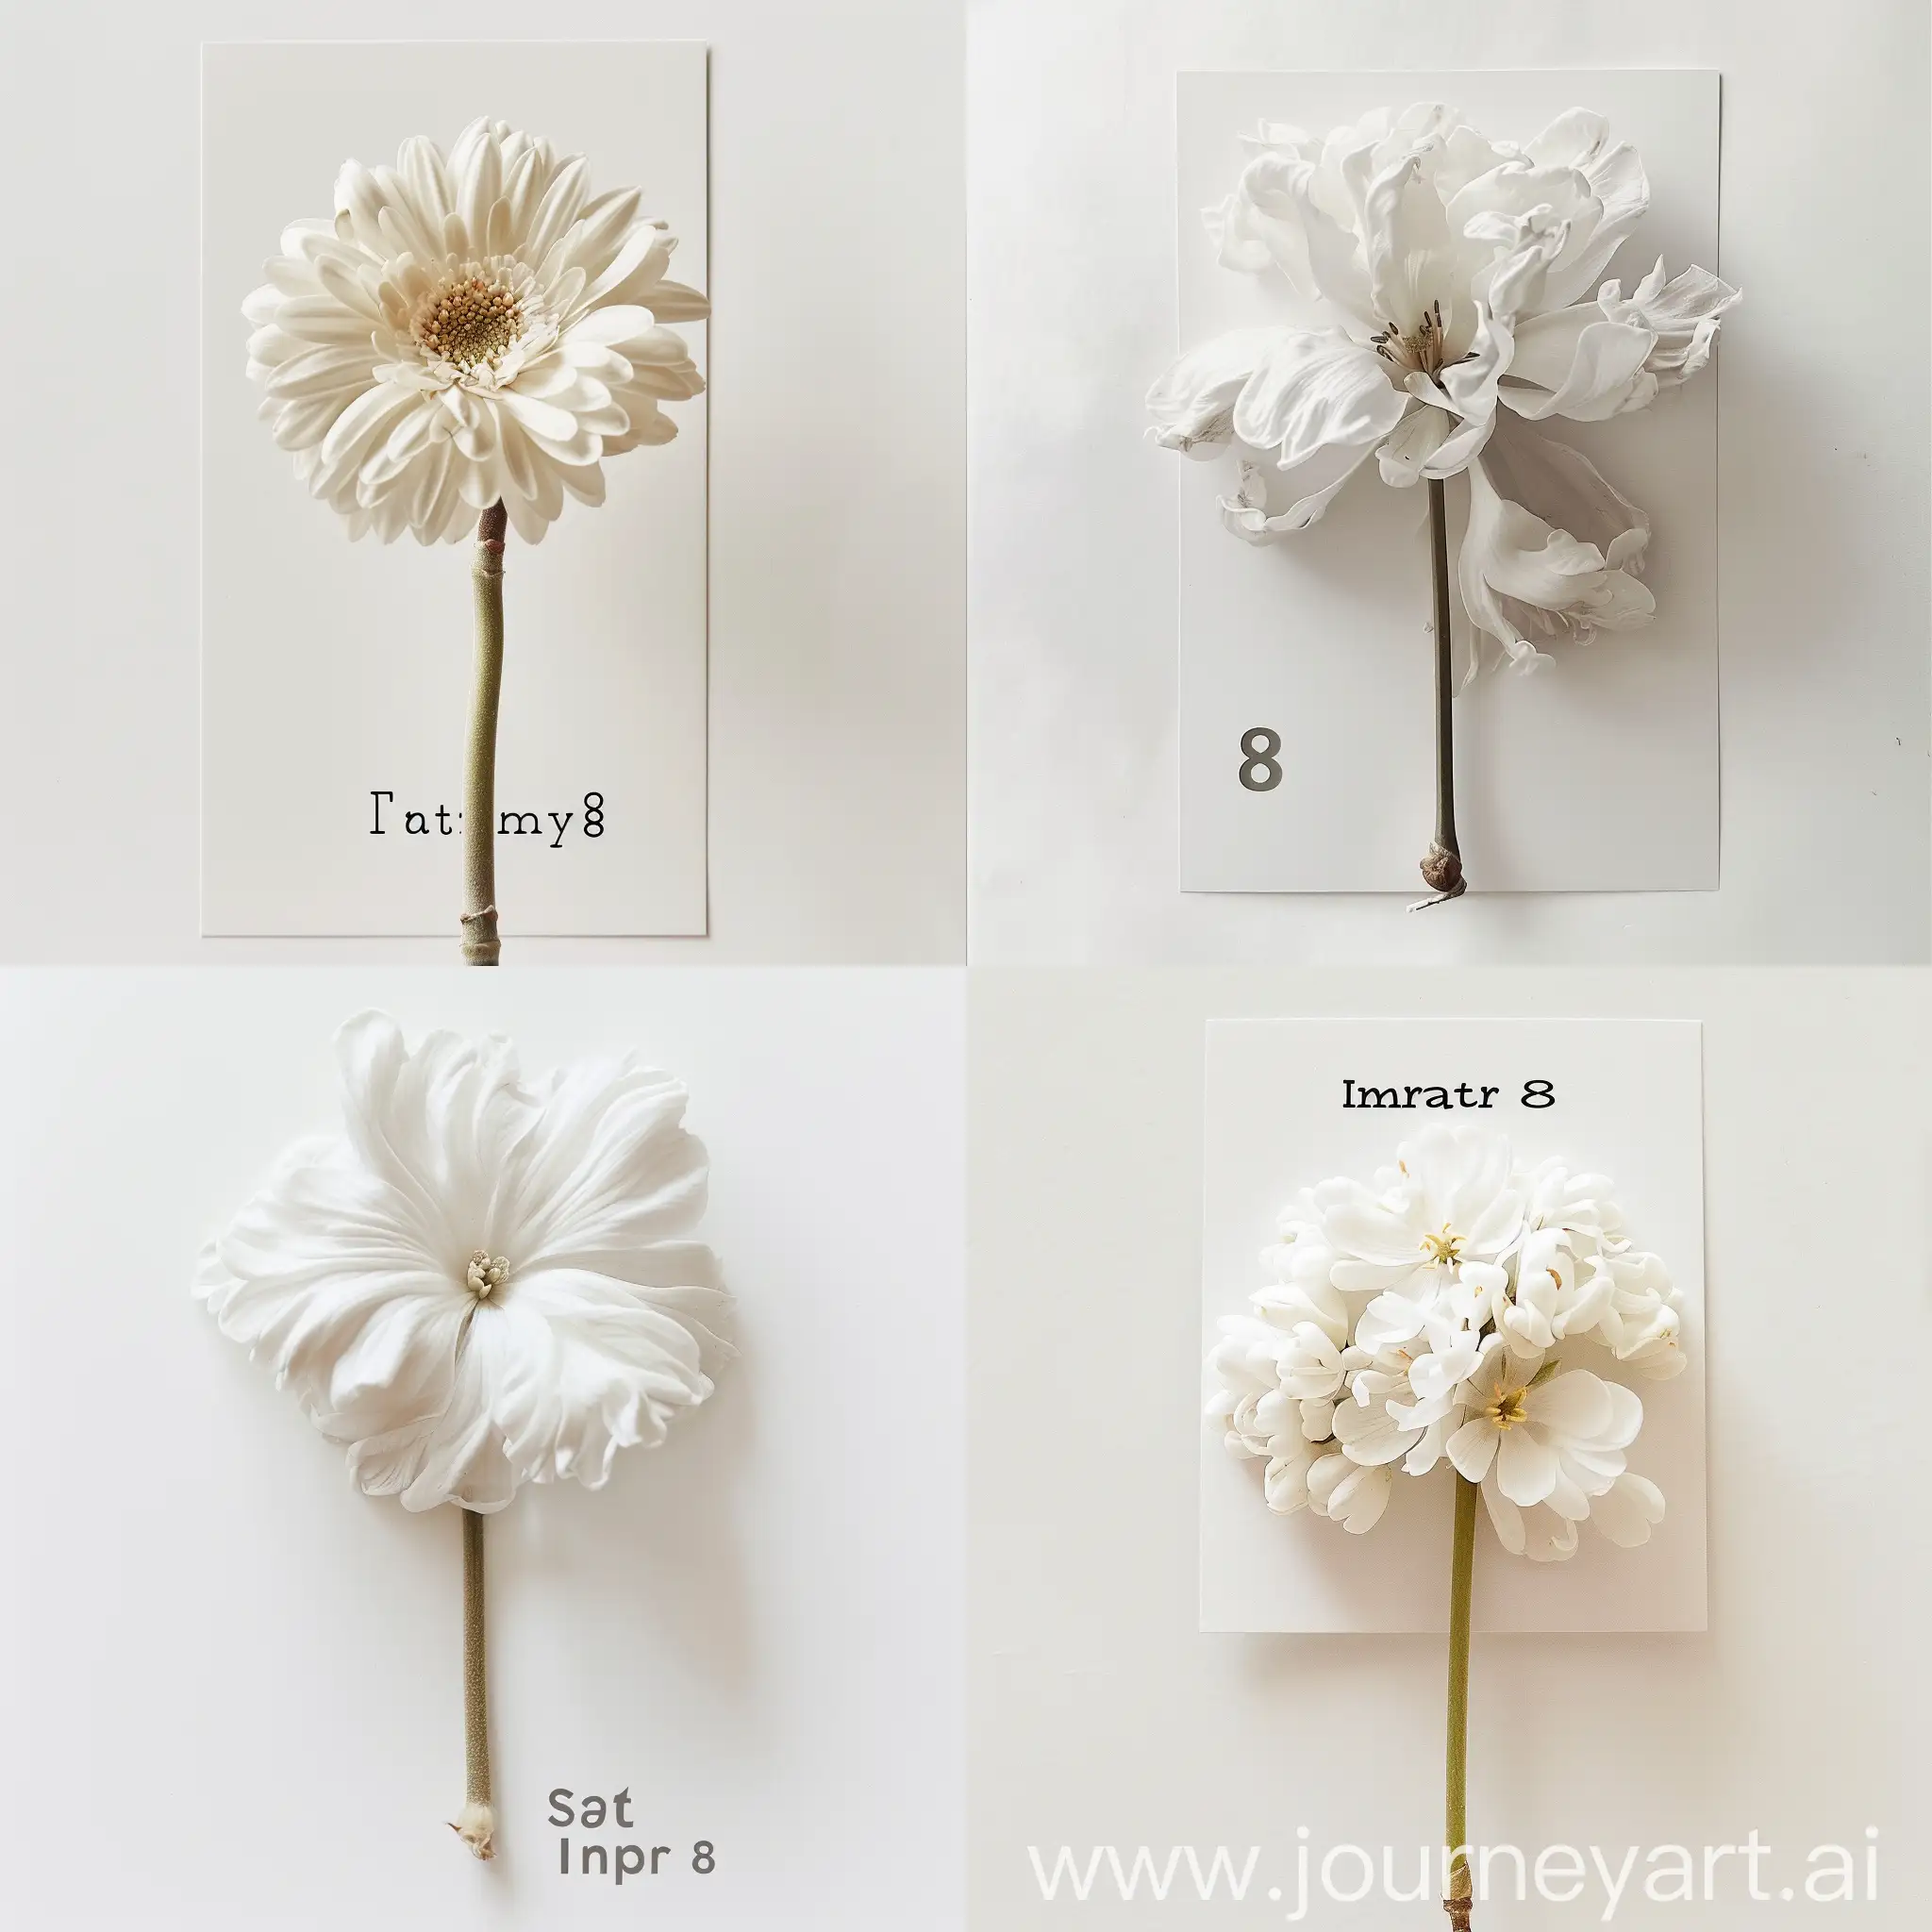 postcard for March 8, in the middle there is a white flower with a stem, realism, white background